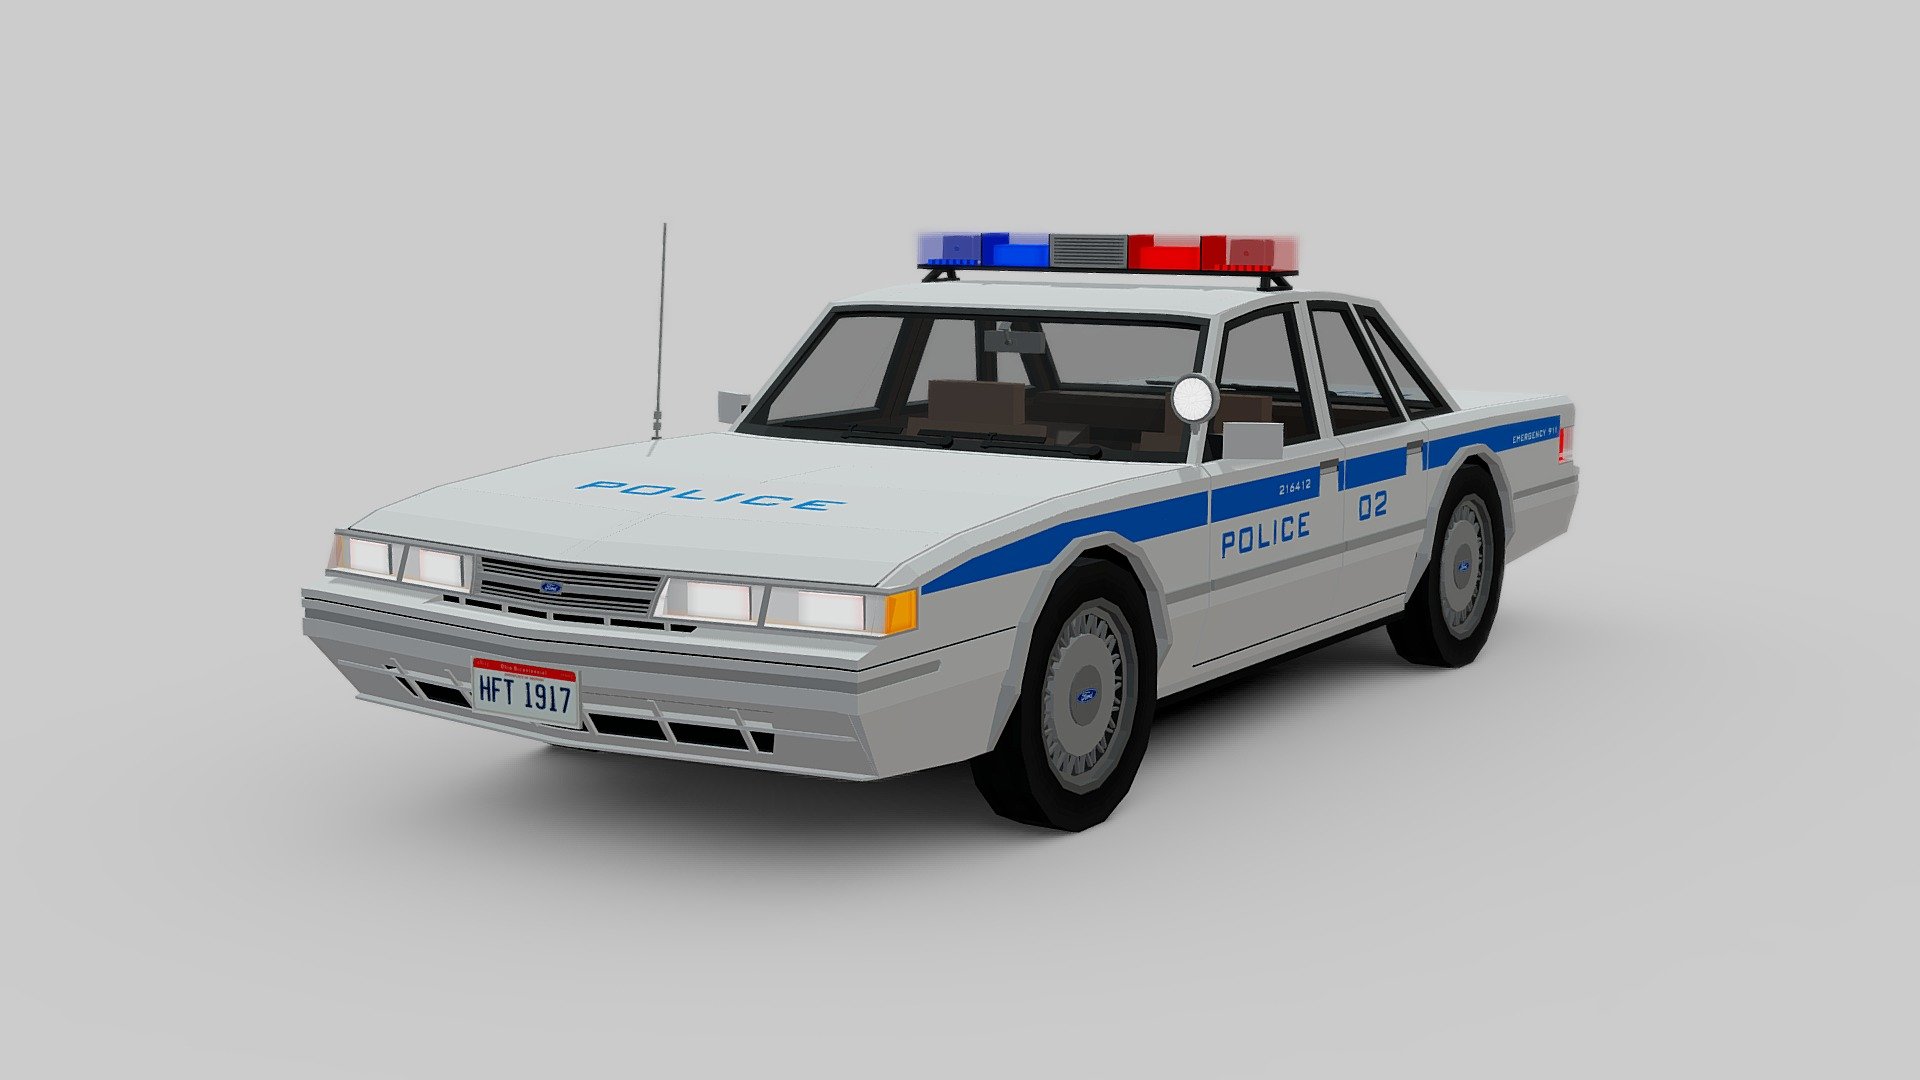 A Minecraft replica of a first generation Ford Crown Victoria Police Interceptor (CVPI). Developed to be used as a working model in my Minecraft:Bedrock Edition addon. To be posted on MCPEDL 3d model